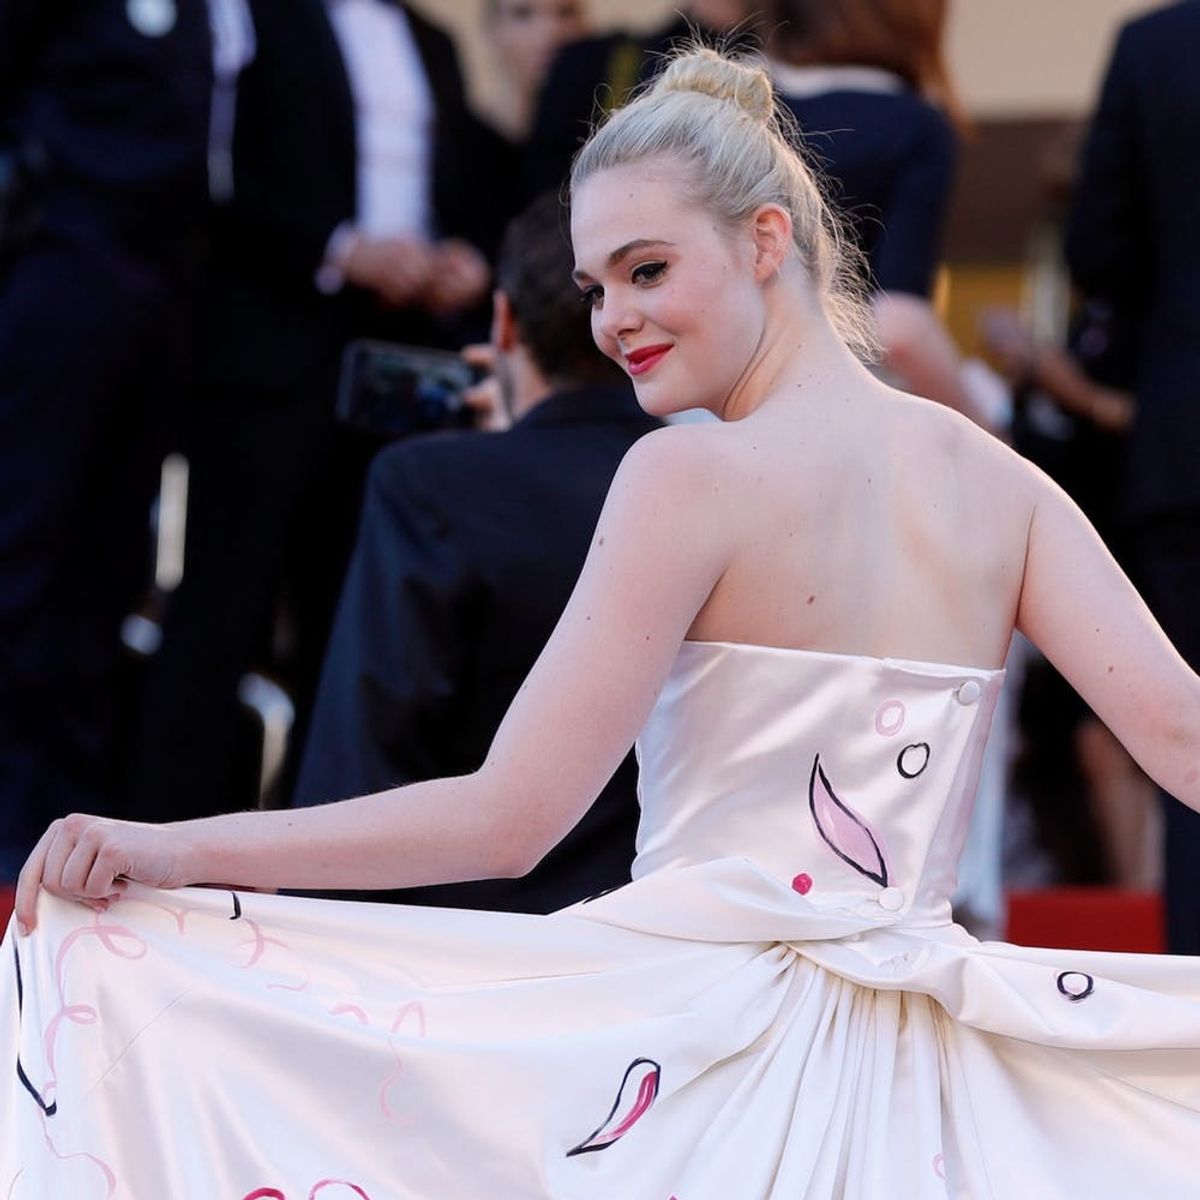 See Every Showstopping Look From the Cannes Film Festival 2017 So Far